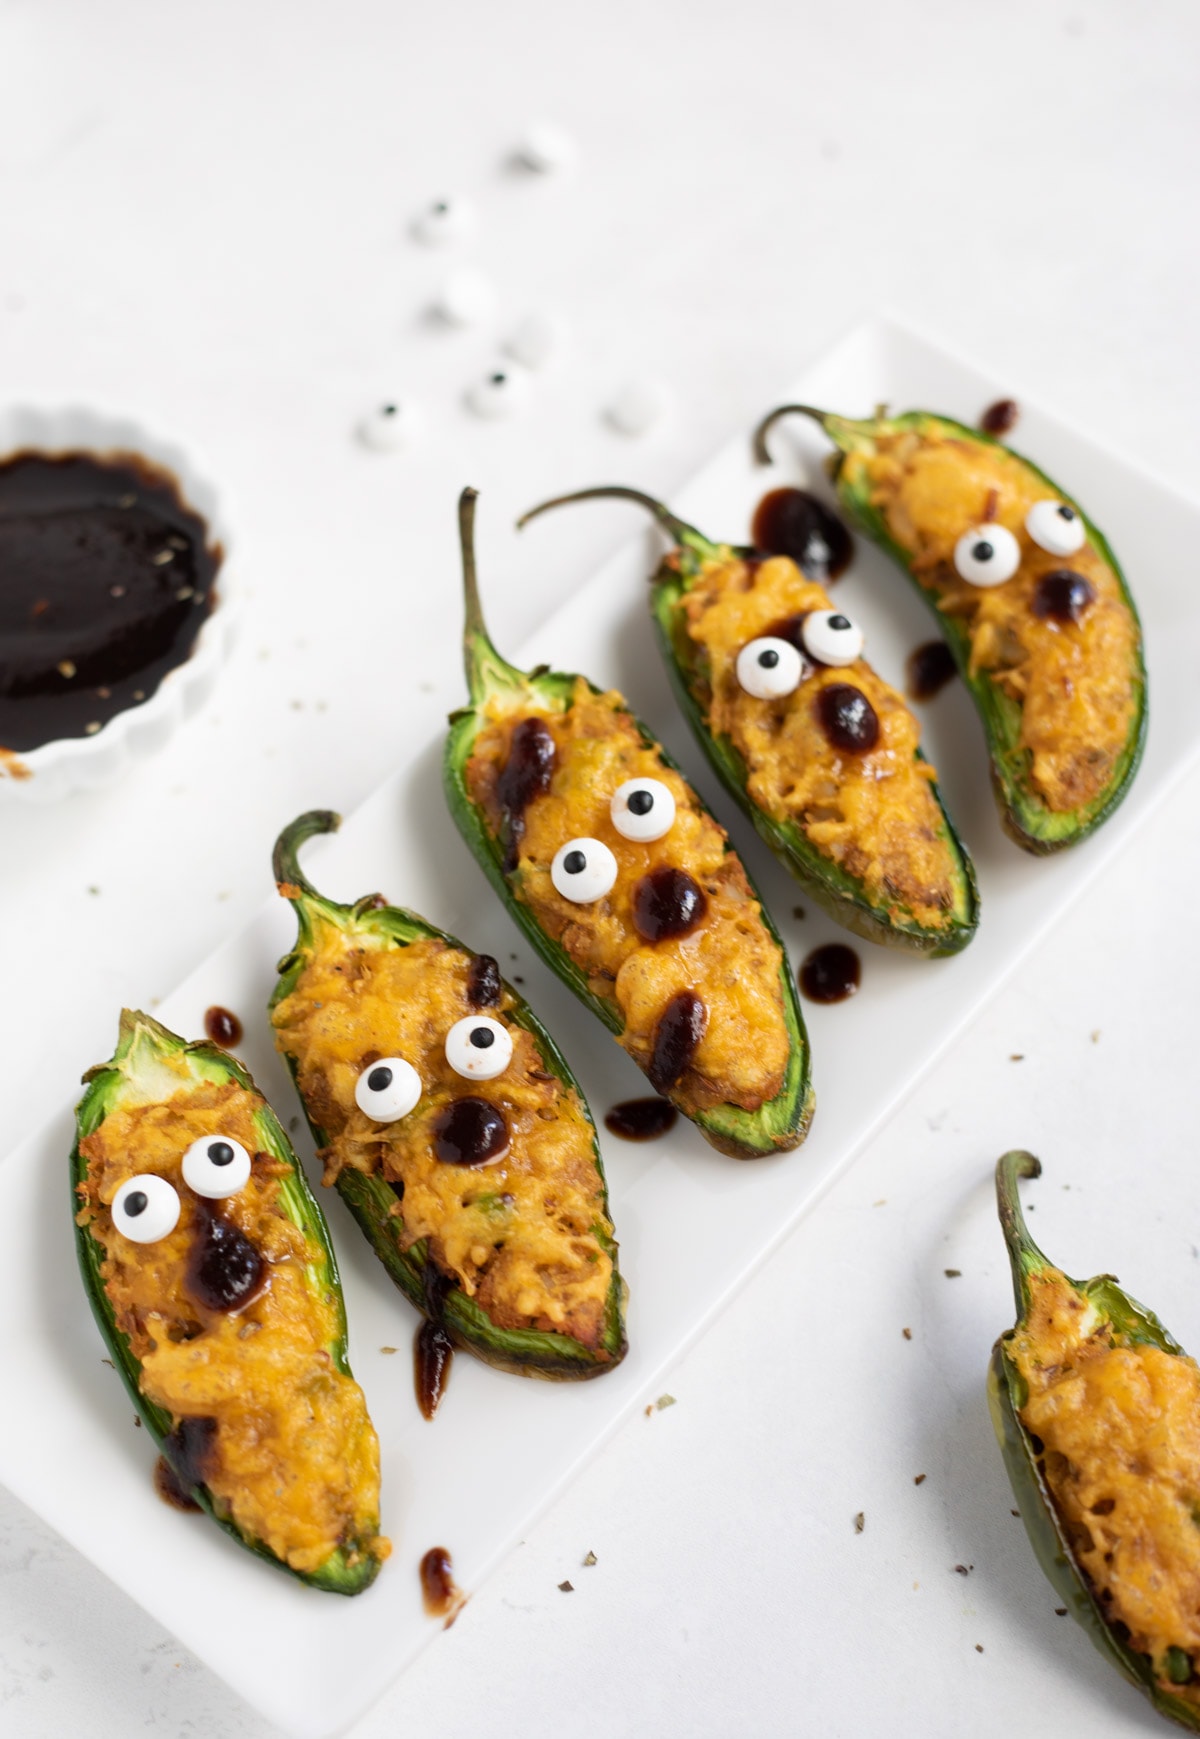 Cute halloween jalapeno poppers with eyes and nose